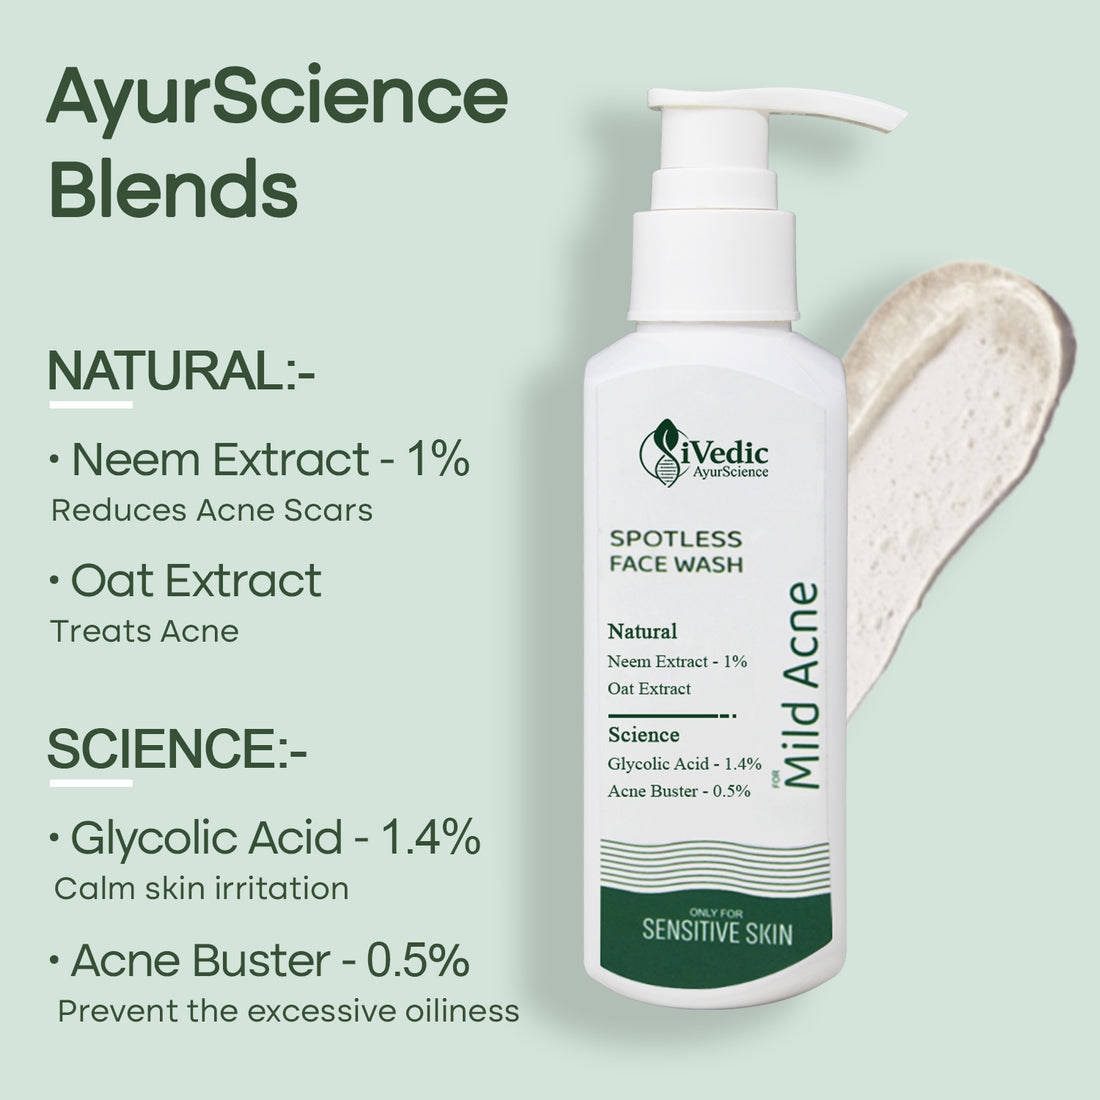 Mild Anti Acne Face Wash Cleanser (1.4% Glycolic Acid, 0.5% Acne Buster, & 1% Neem Extract) for Blackheads & Open pores